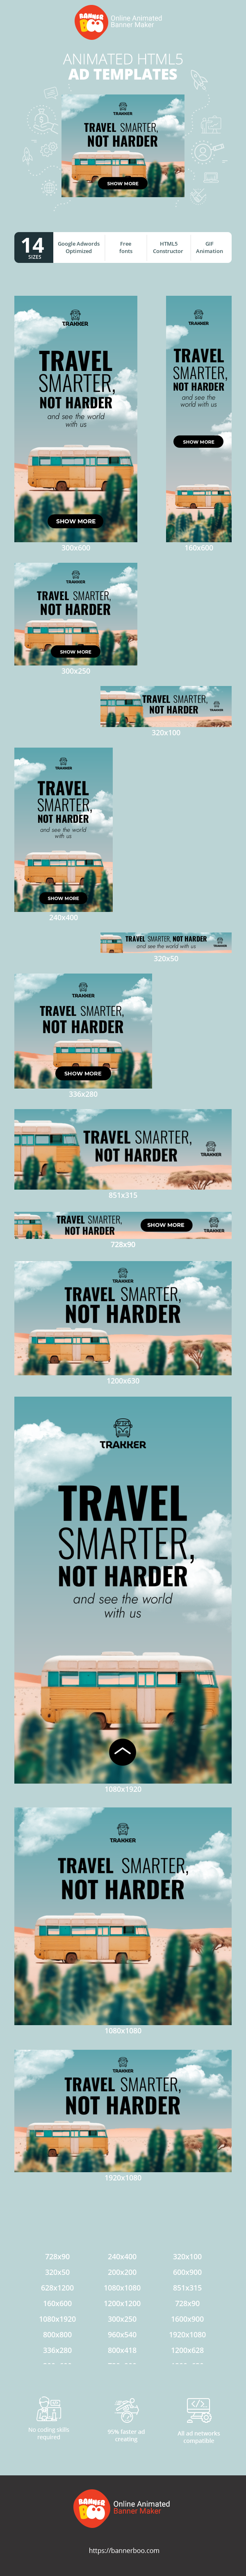 Banner ad template — Travel Smarter, Not Harder — And See The World With Us